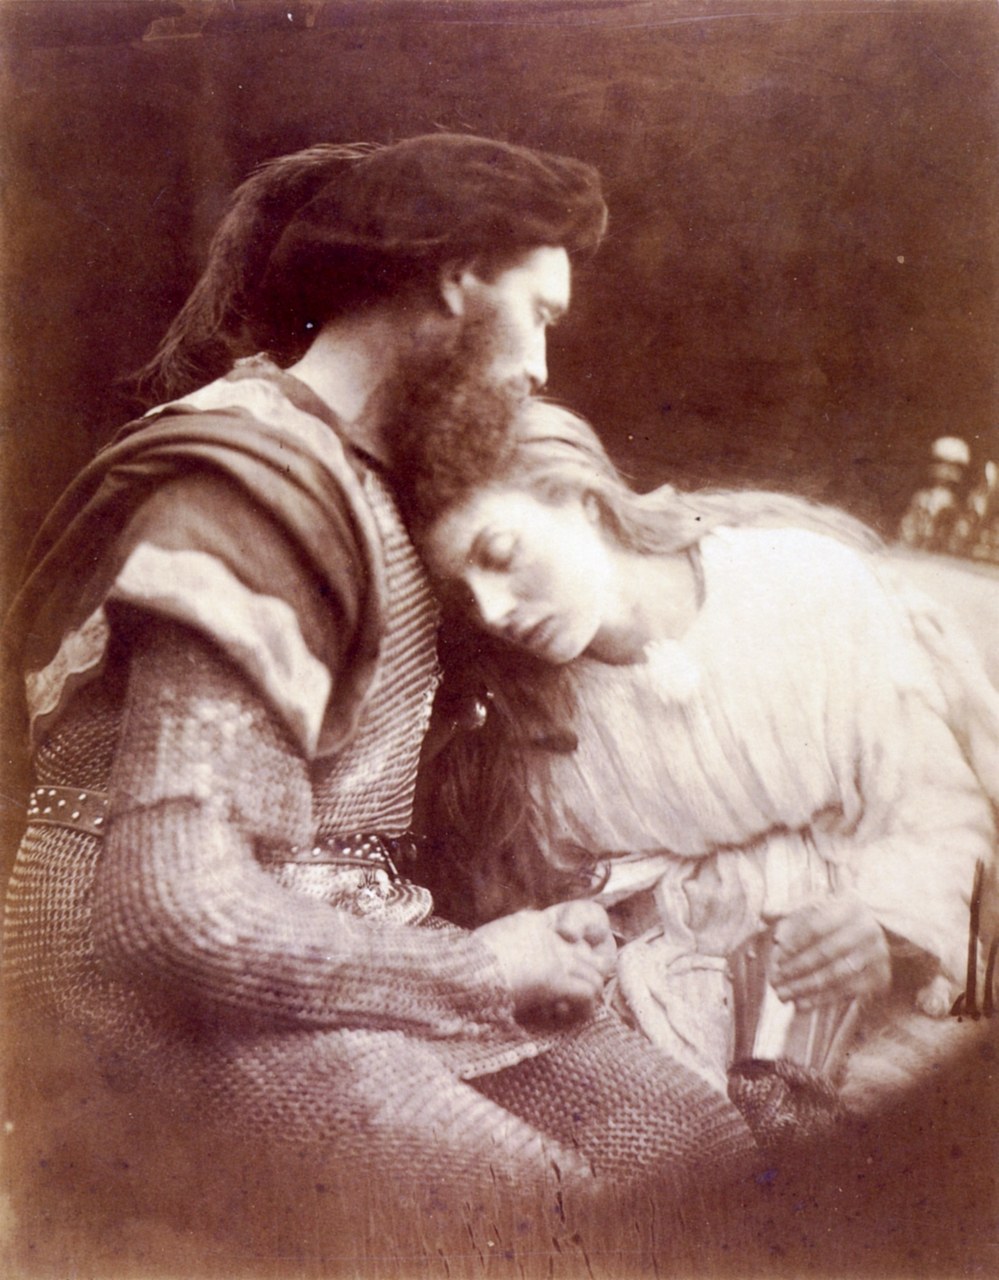 fig. 6 Julia Margaret Cameron,&nbsp;The Parting of Sir Lancelot and Queen Guinevere, illustrazione per Alfred Tennyson,&nbsp;Idyllis of the King and Other Poems. I modelli sono Andrew Hichens e Mary Prinsep, Paris, Mus&eacute;e d&rsquo;Orsay&nbsp;
